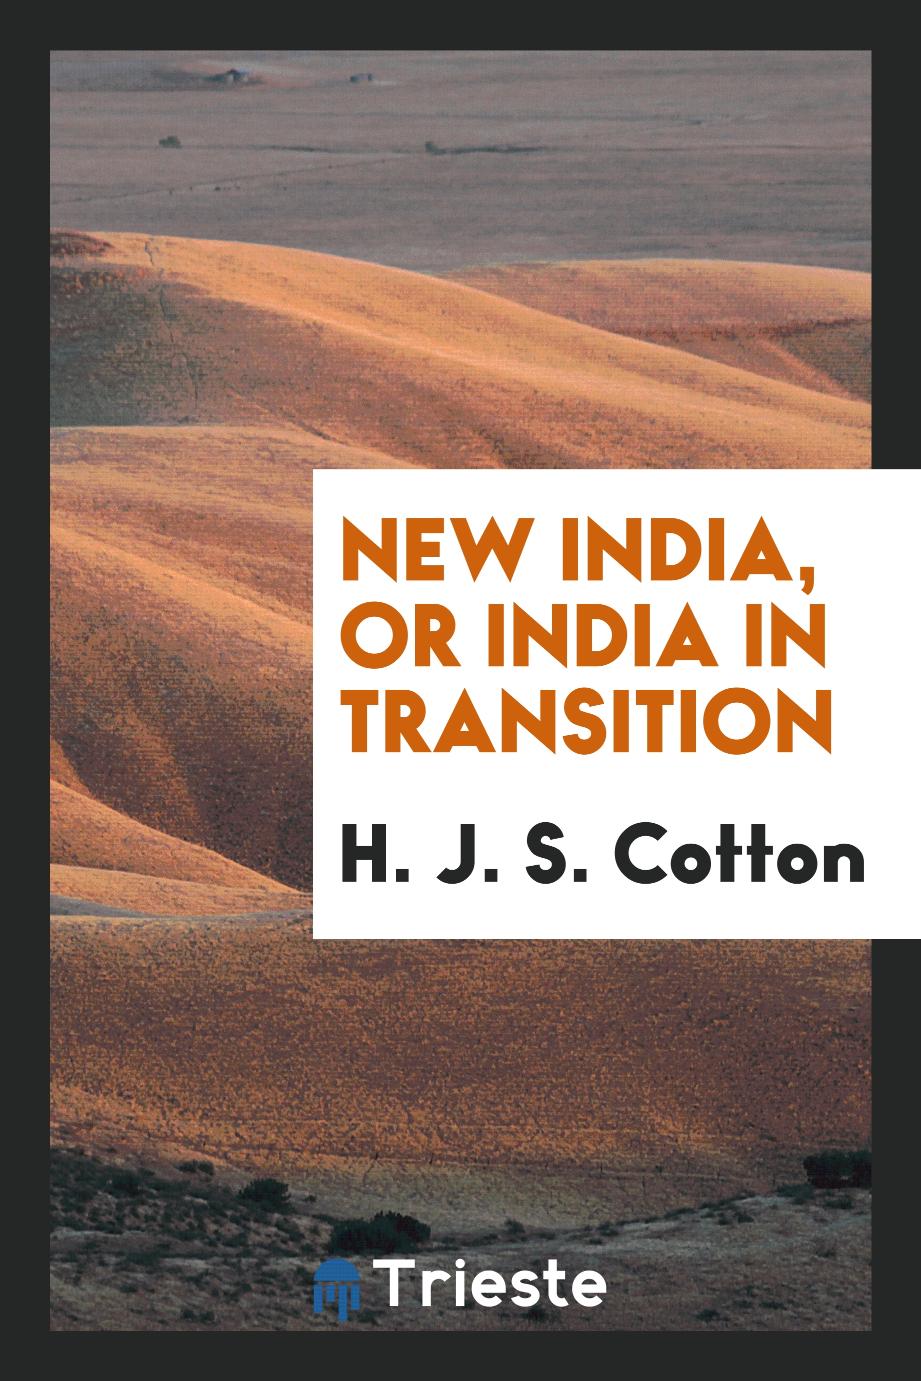 New India, or India in Transition